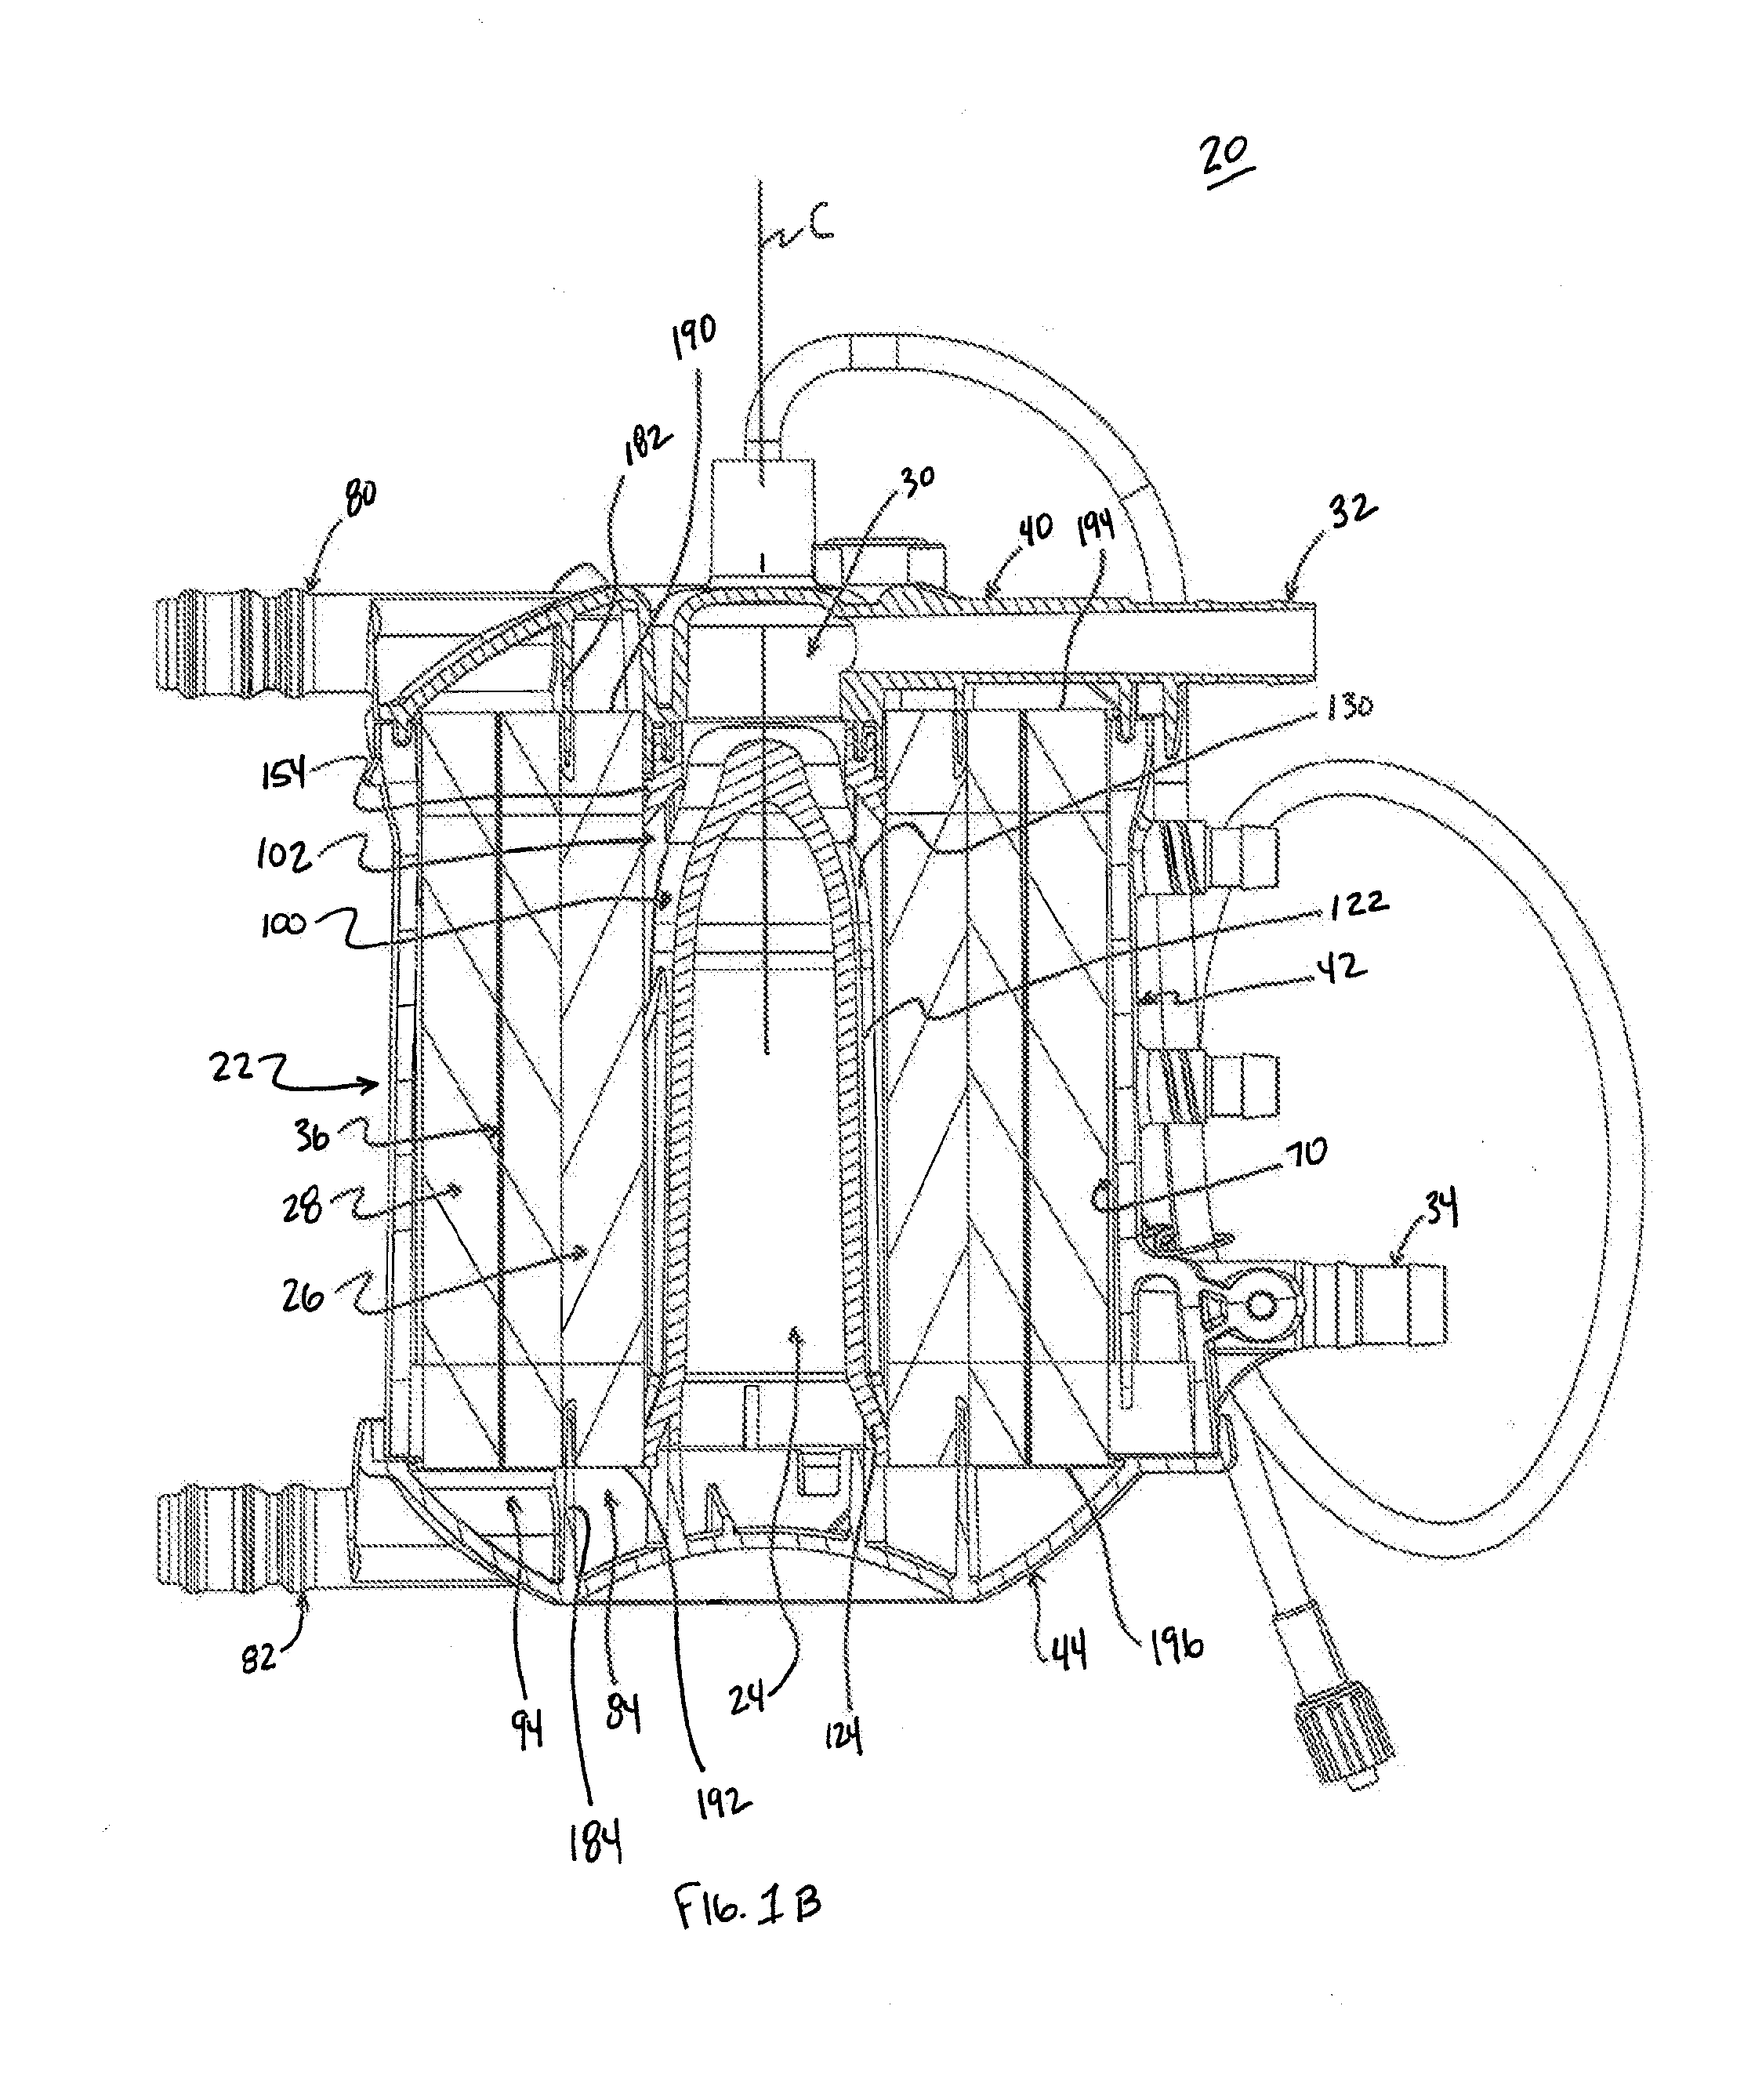 De-Airing Oxygenator for Treating Blood in an Extracorporeal Blood Circuit